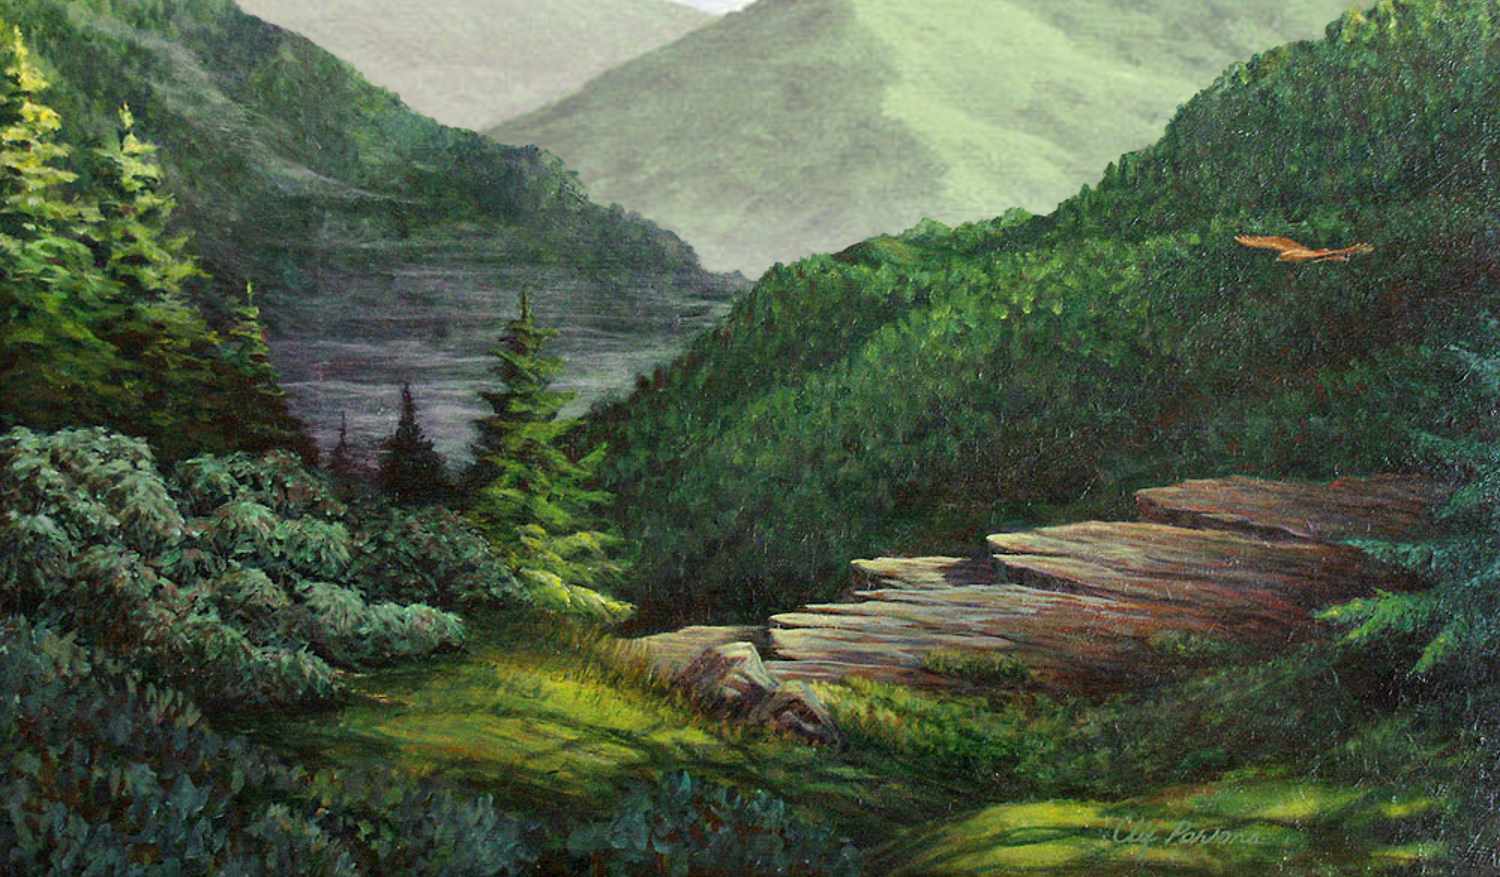 Misty Morning Mountain - Red Tail Hawk | 24 x 19 | acrylic on masonite | copyright Clif Parsons